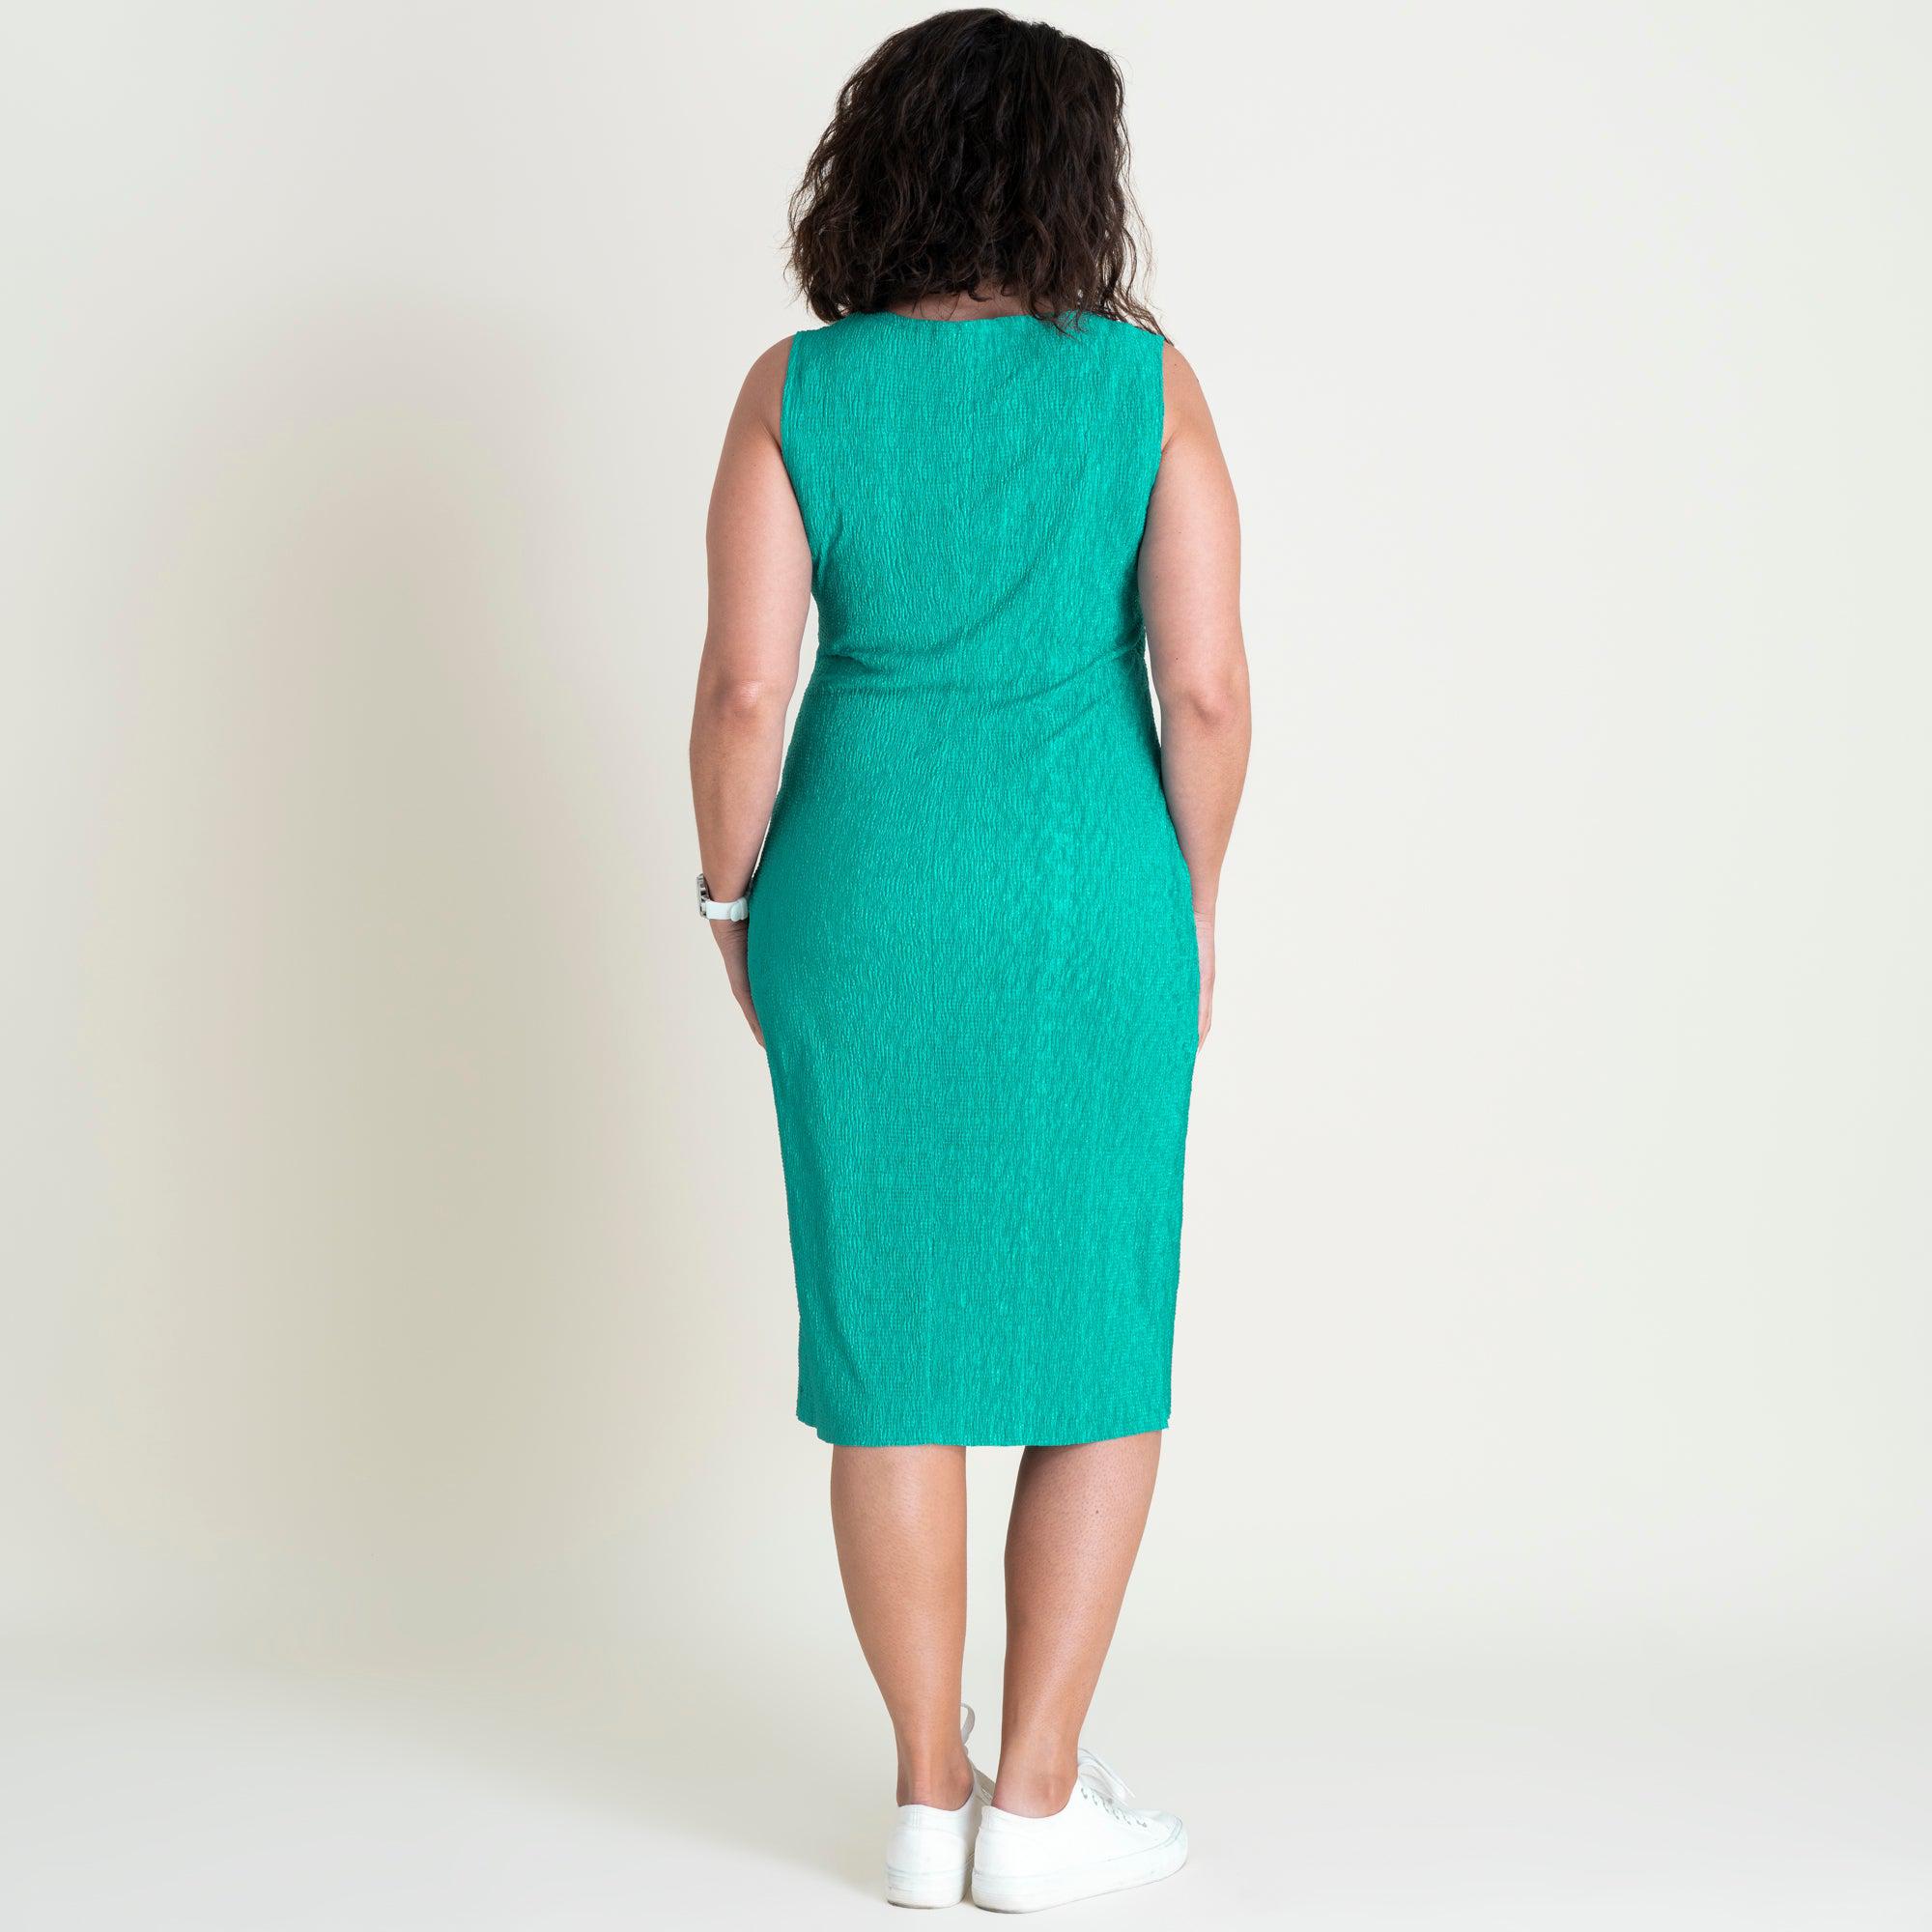 Woman posing wearing Bright Green Terra Bright Green Sheath Dress from Connected Apparel